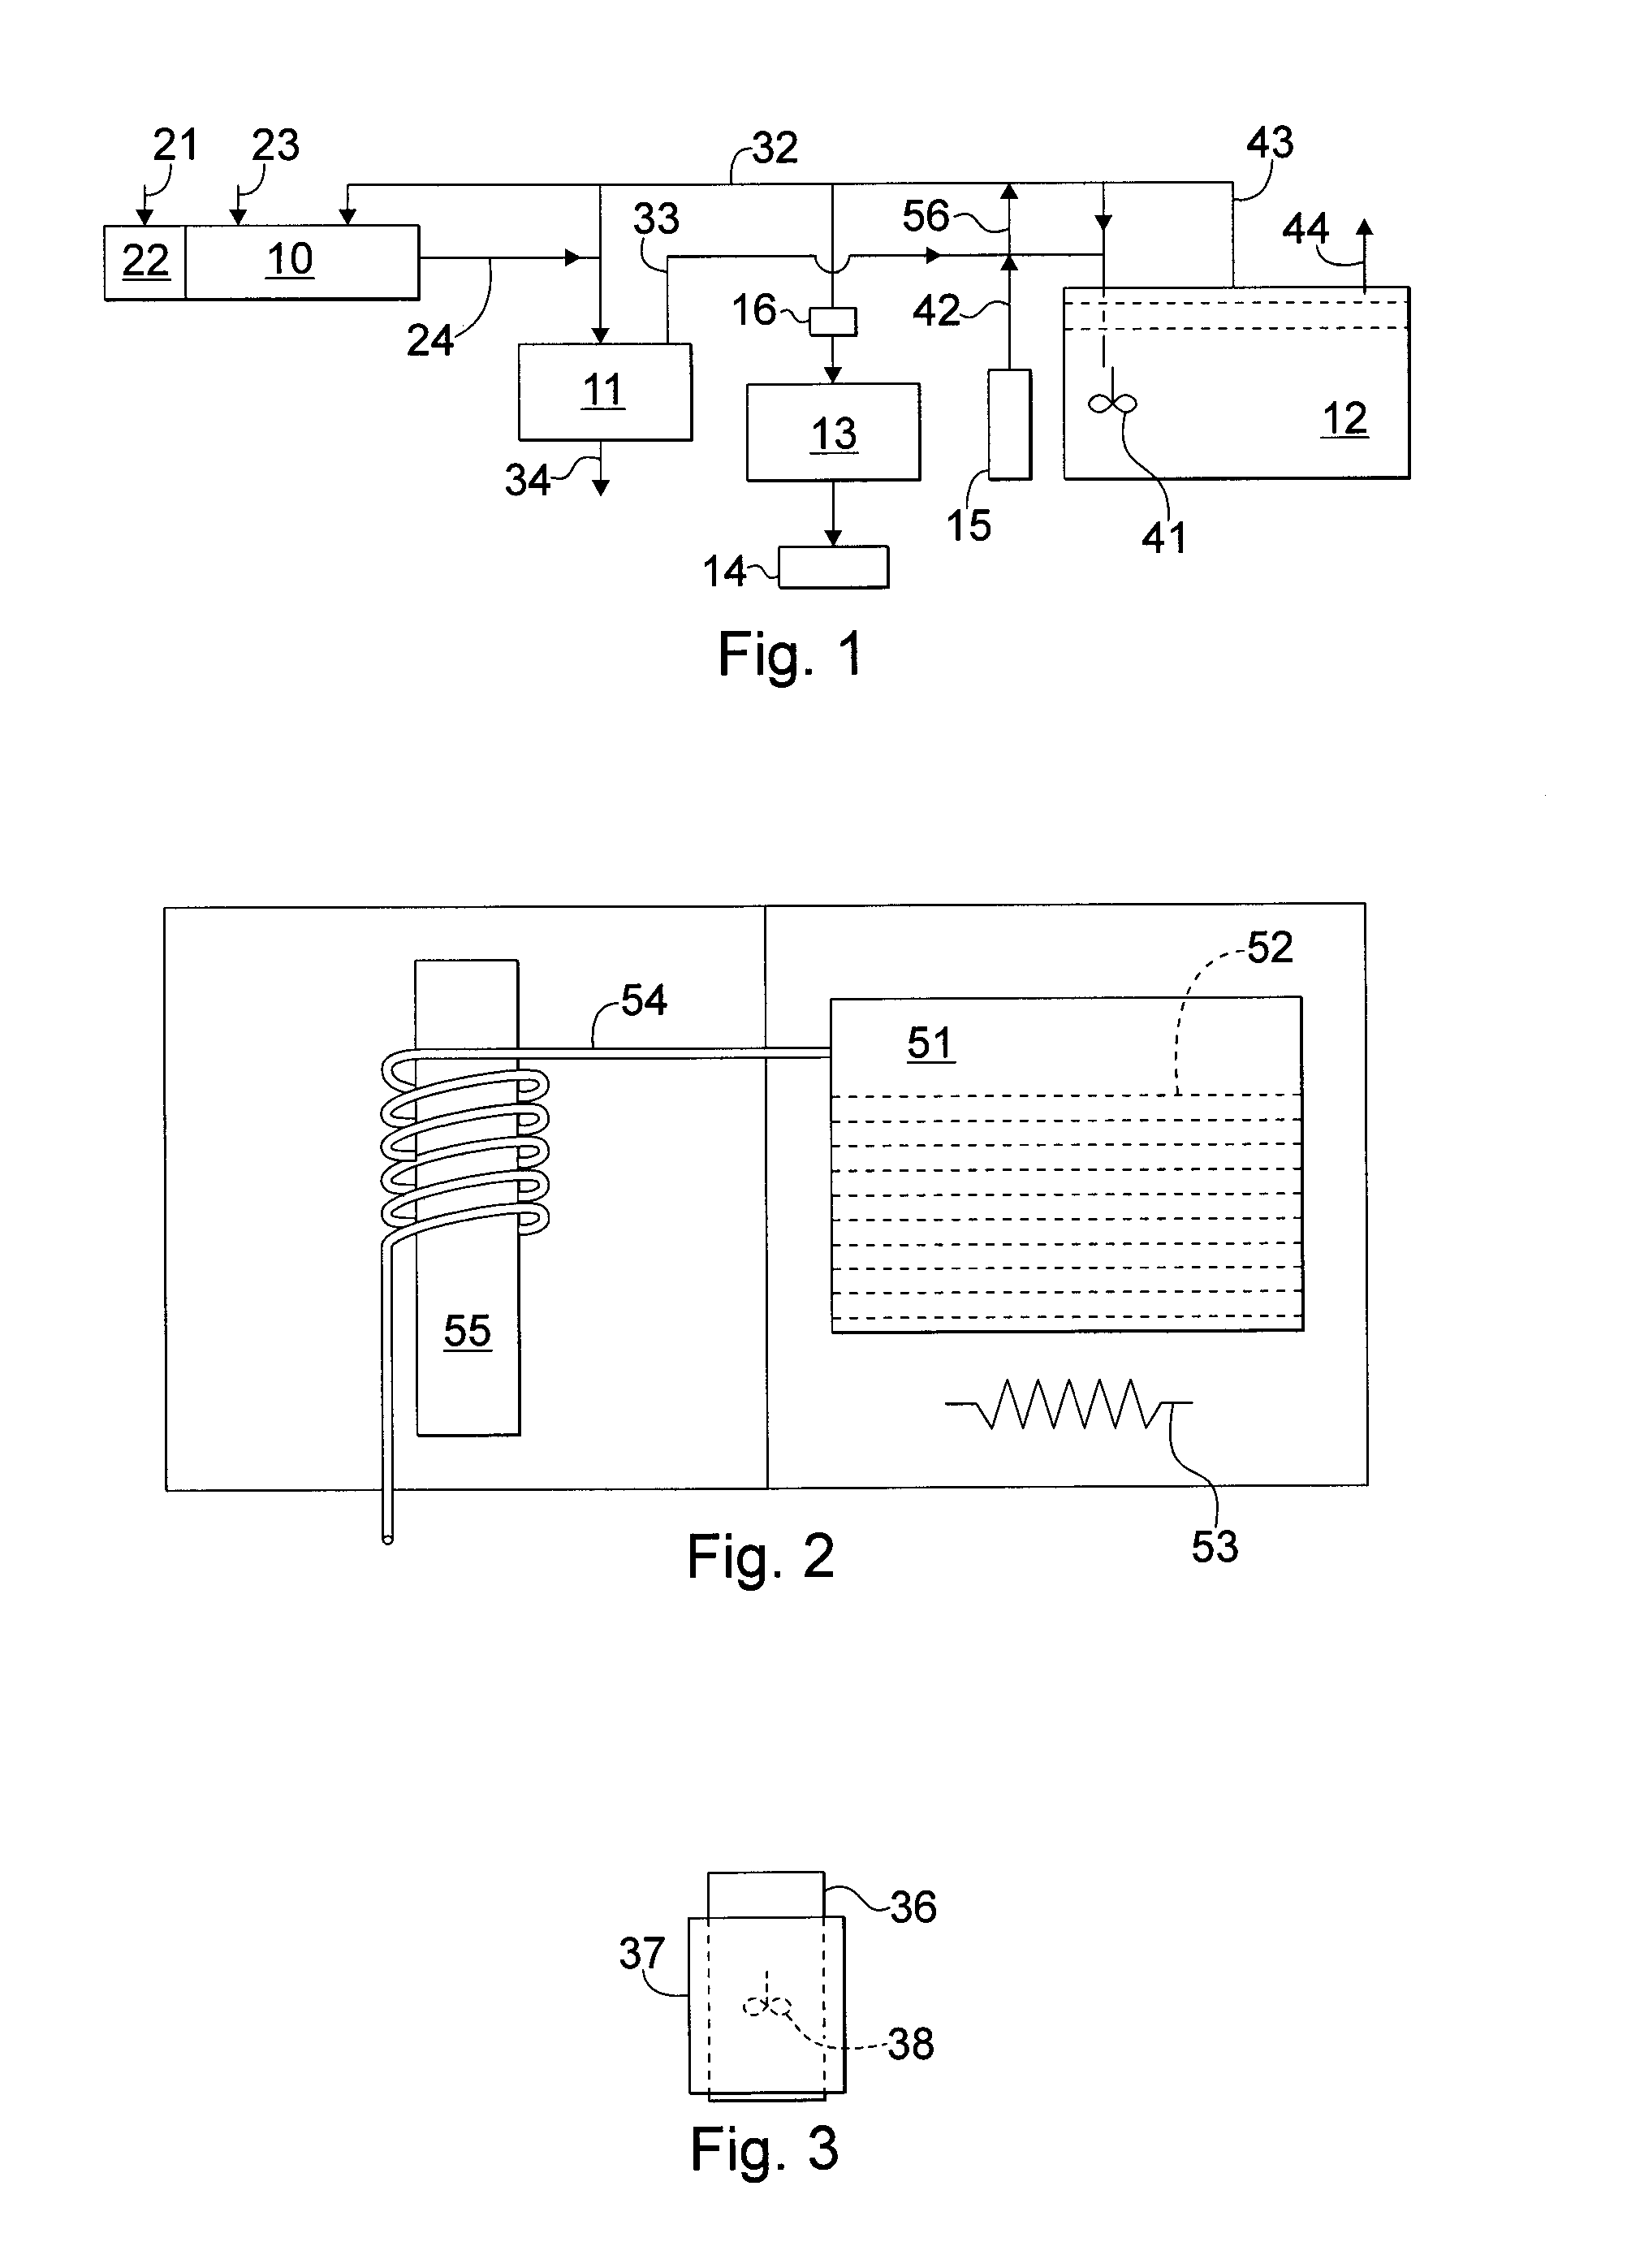 Apparatus and method for producing fuel ethanol from biomass